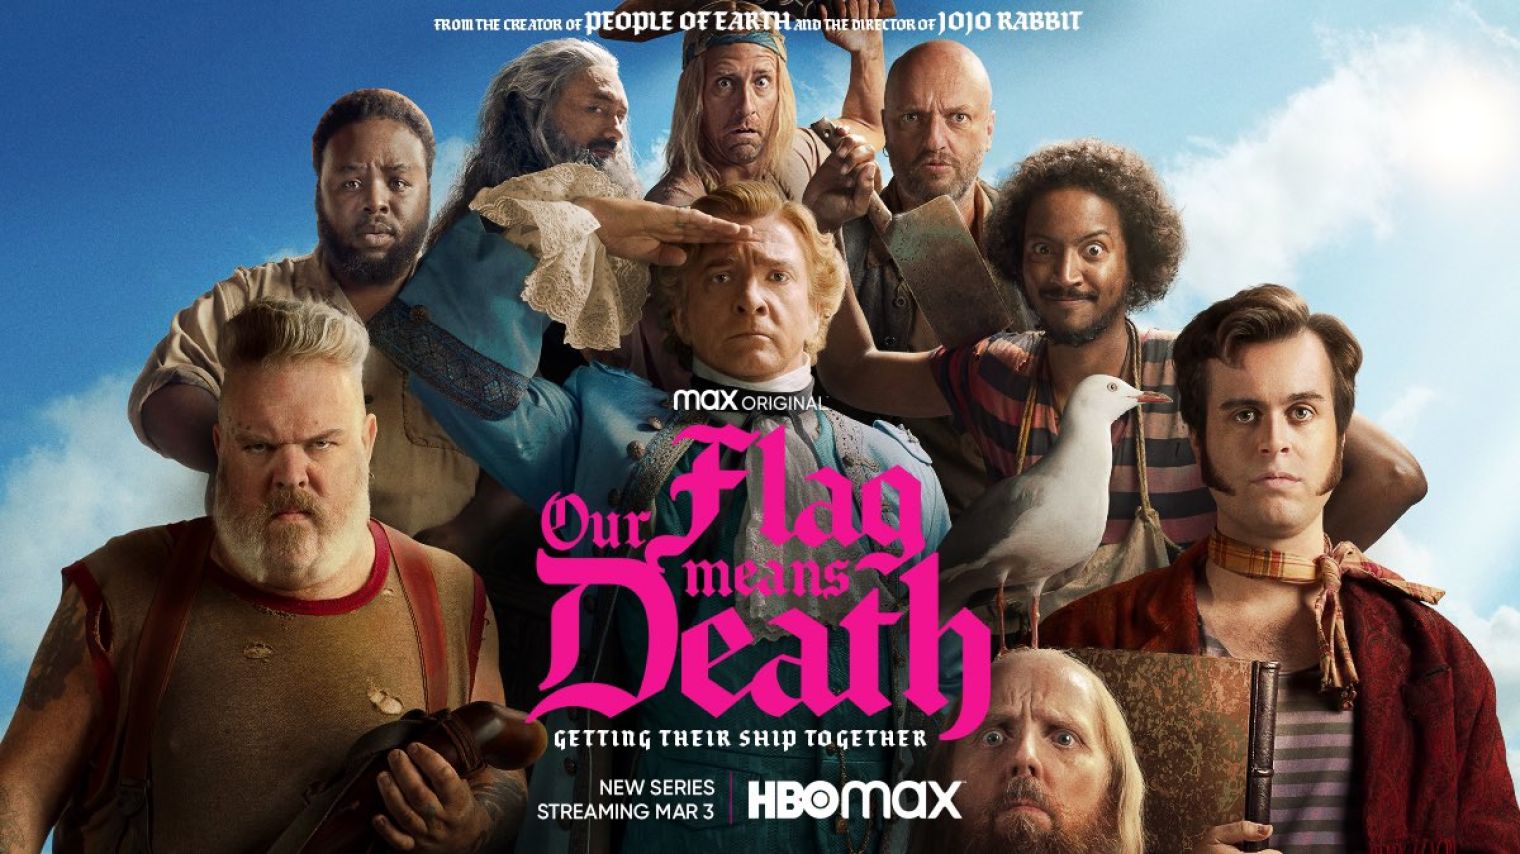 Nathan Foad stars in new pirate comedy 'Our Flag Means Death' which premieres on HBO Max this Thursday